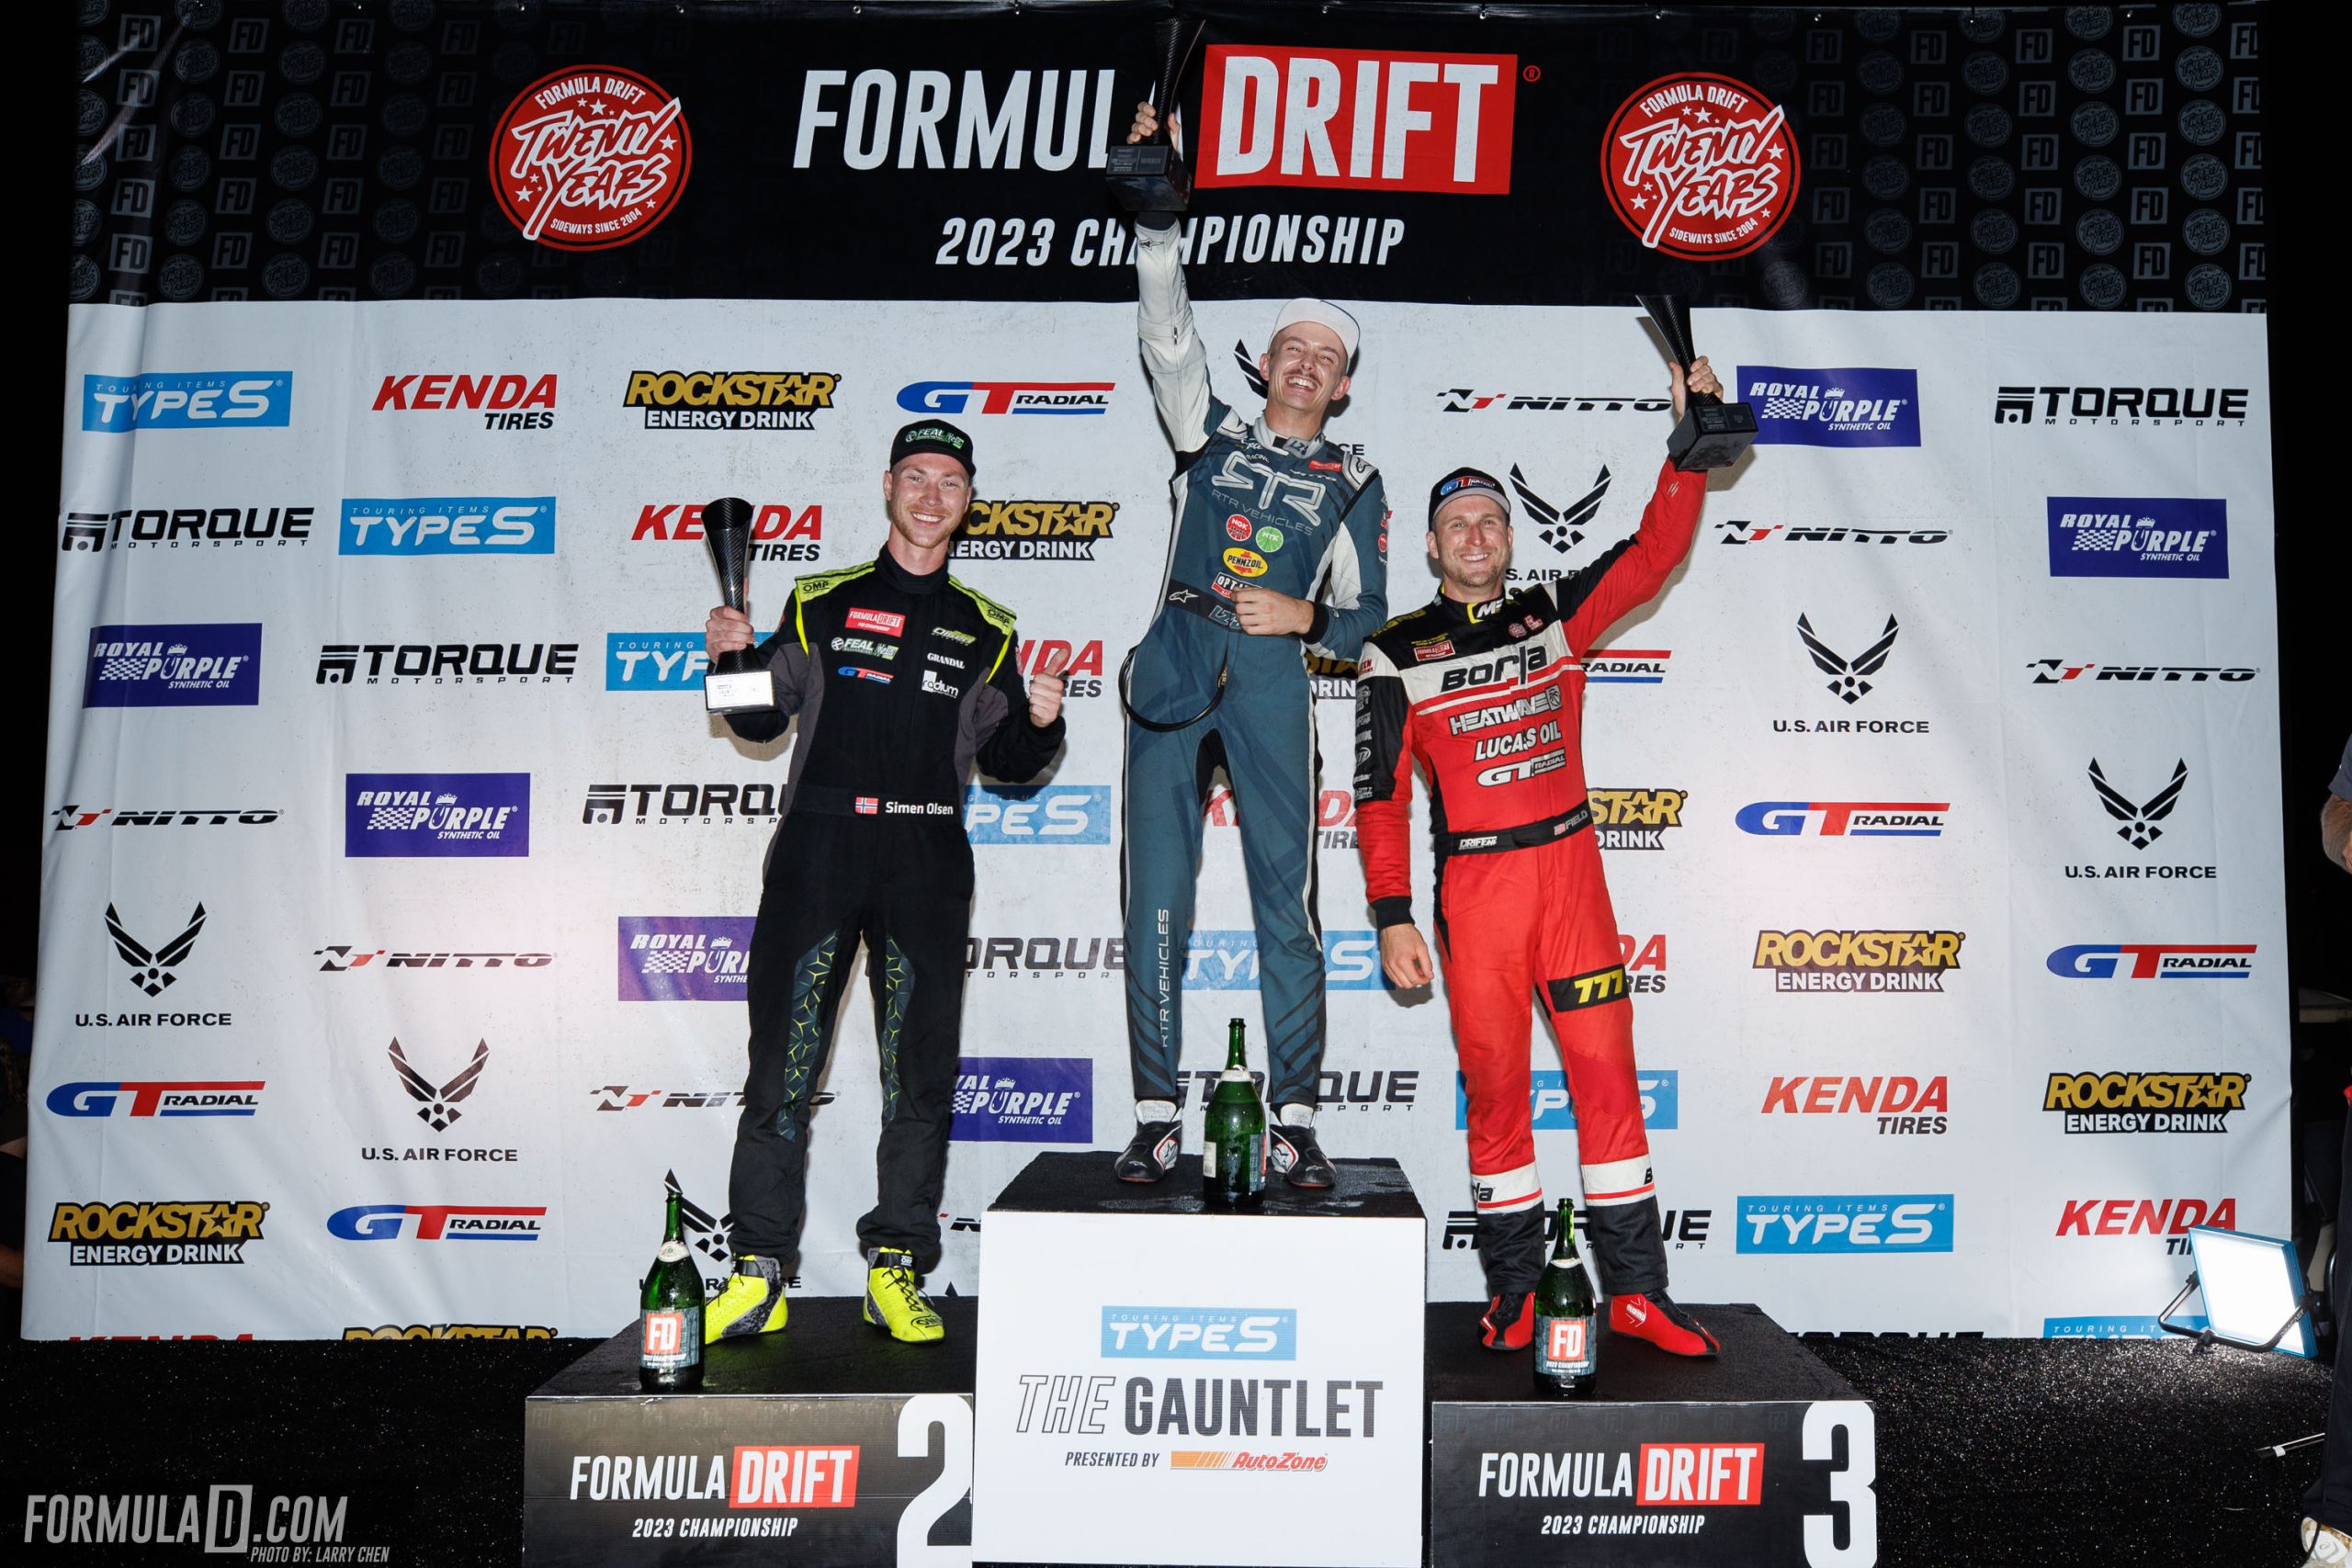 ADAM LZ AND COLE RICHARDS TAKE FIRST WINS IN 2023 FORMULA DRIFT PRO CHAMPIONSHIP ROUND 4 AND PROSPEC ROUND 2 IN NEW JERSEY